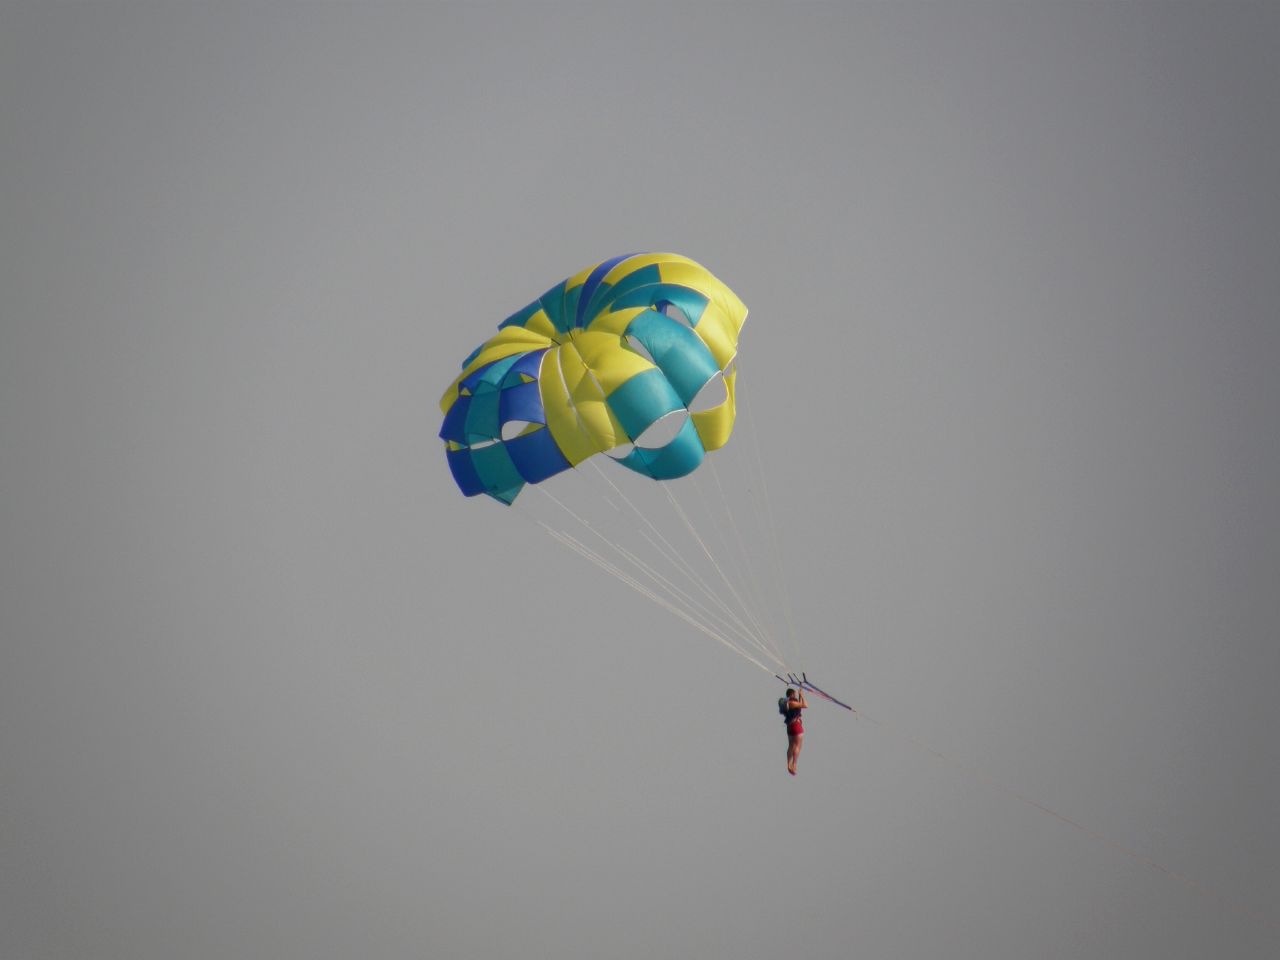 man in yellow parachute holding on to ropes